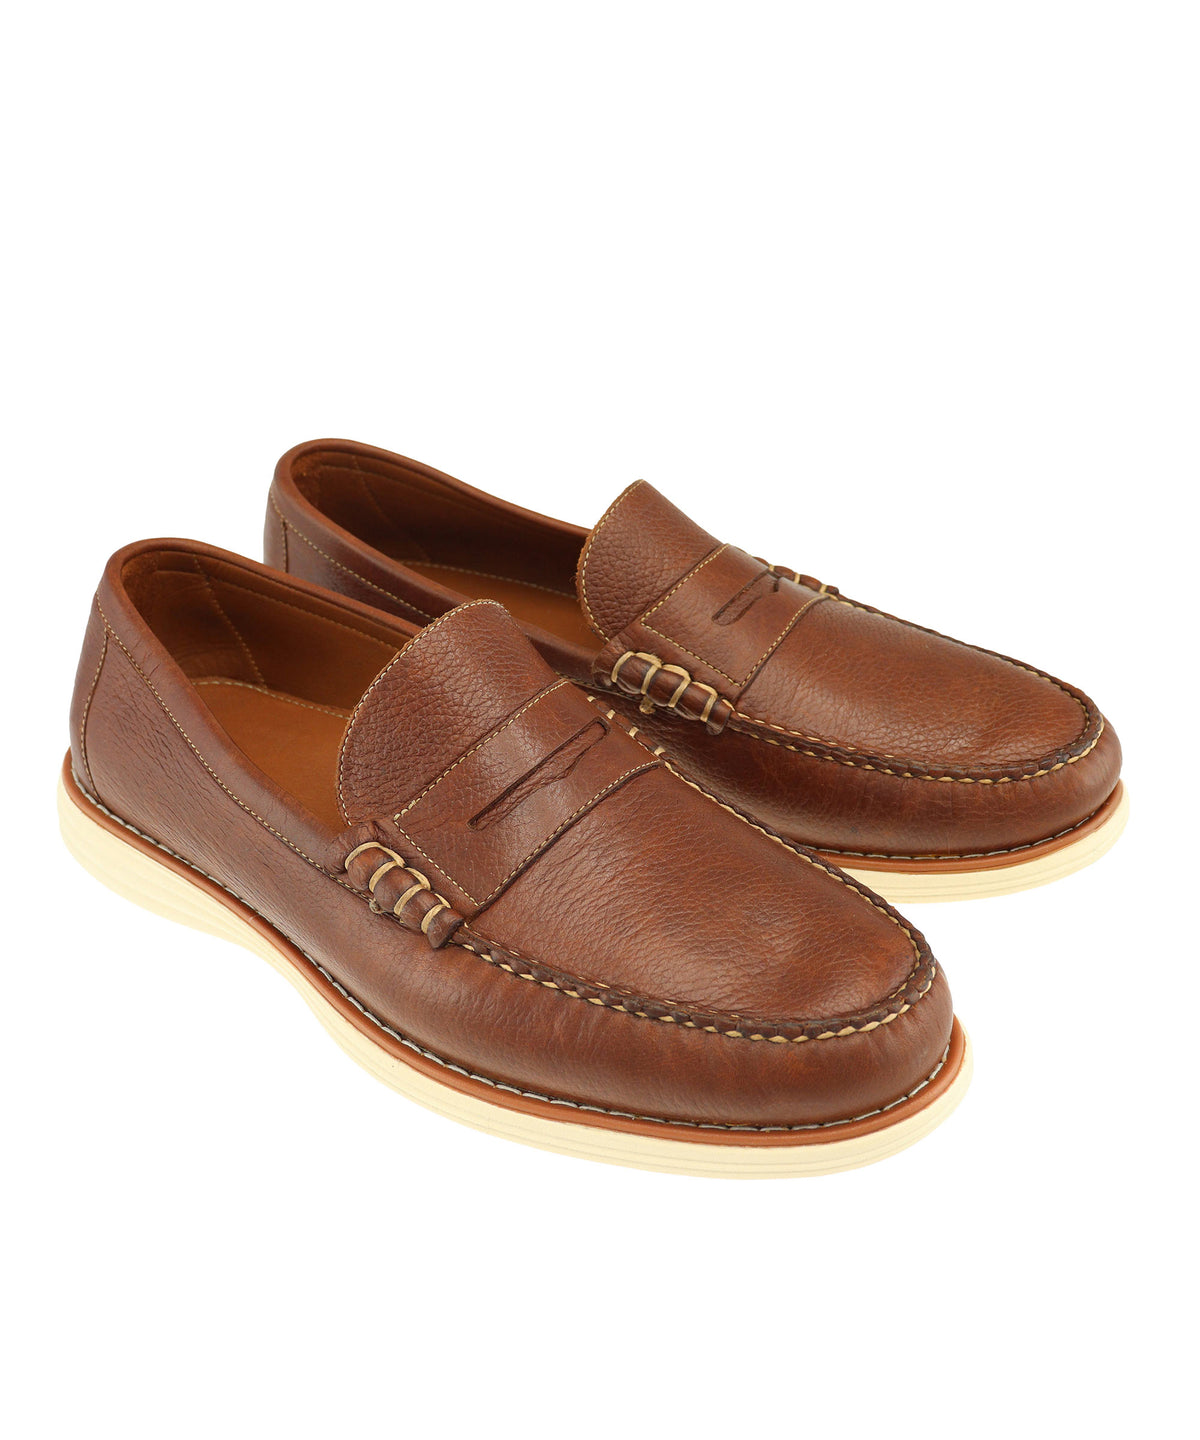 TB Phelps Freeport Sport Tumbled Calfskin Penny Loafer